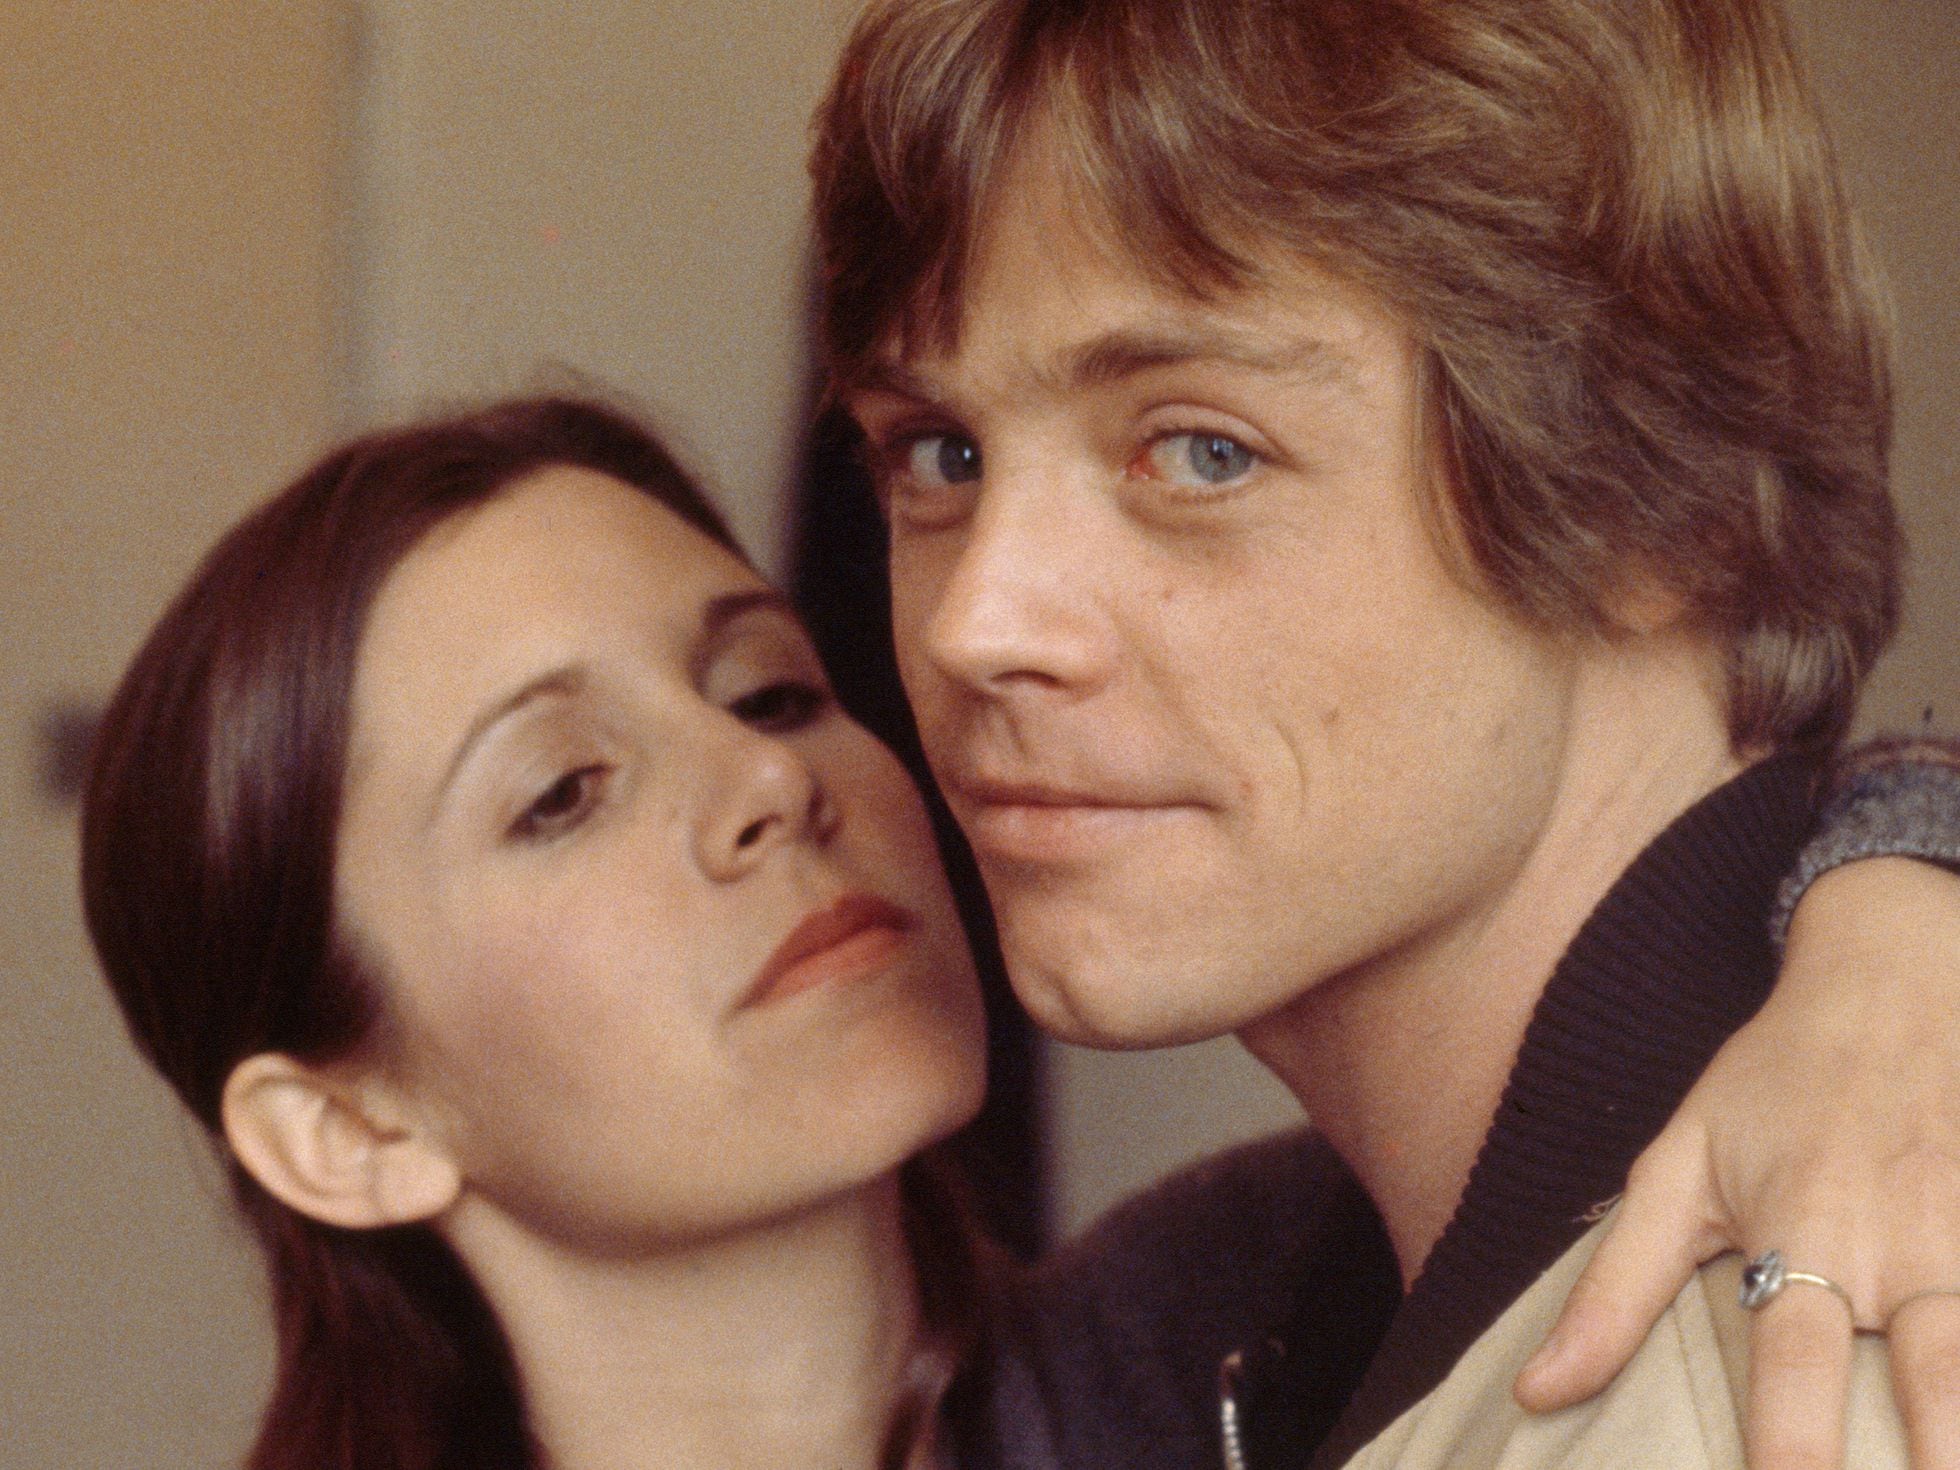 You're Luke Skywalker, get used to it': Why it took Mark Hamill 40